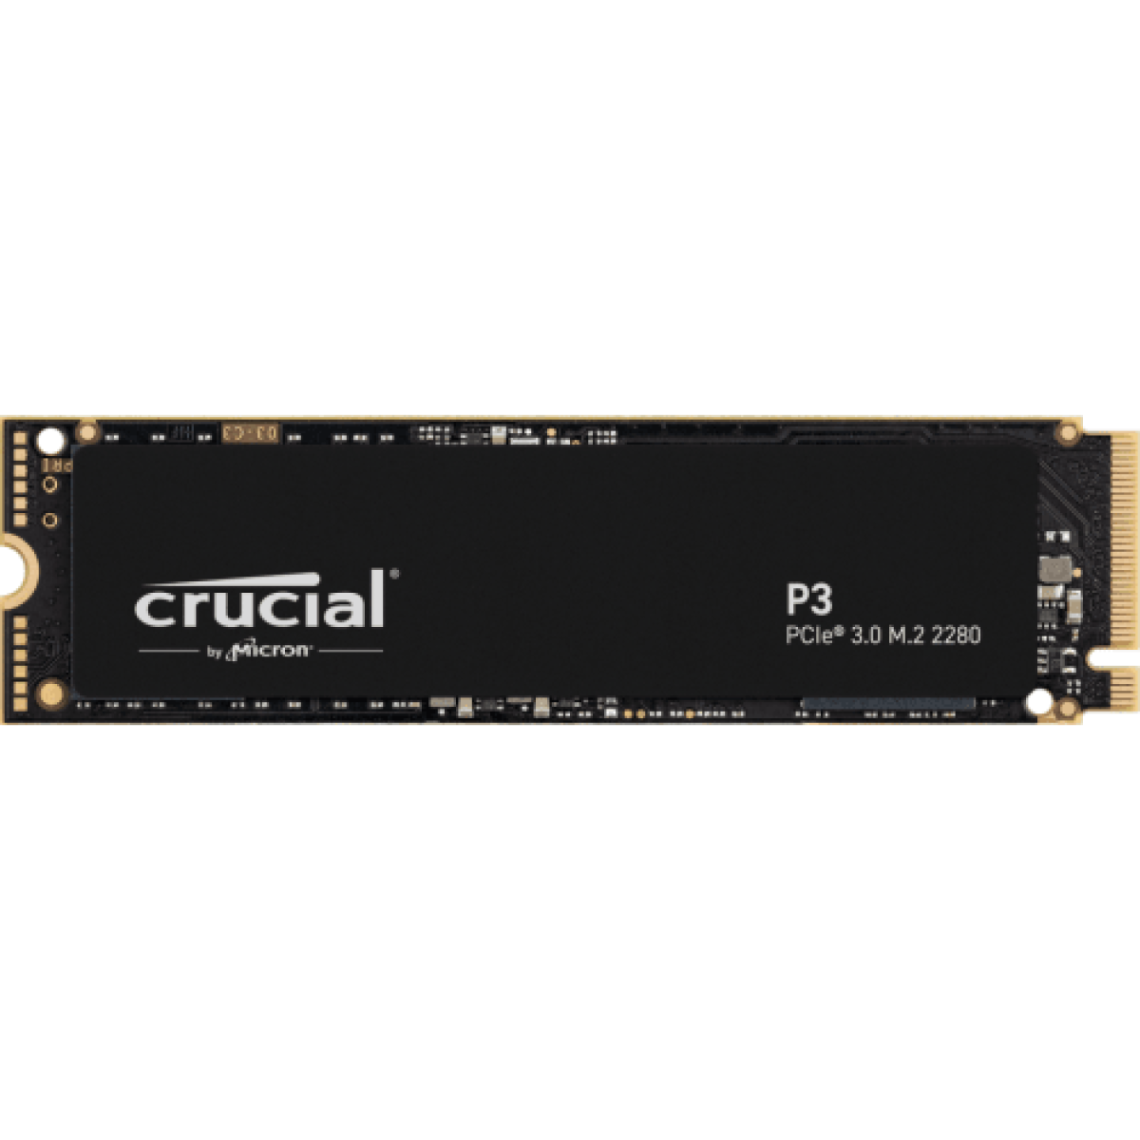 Crucial P3 Disque Dur SSD Interne 1To 3500Mo/s 3D NAND